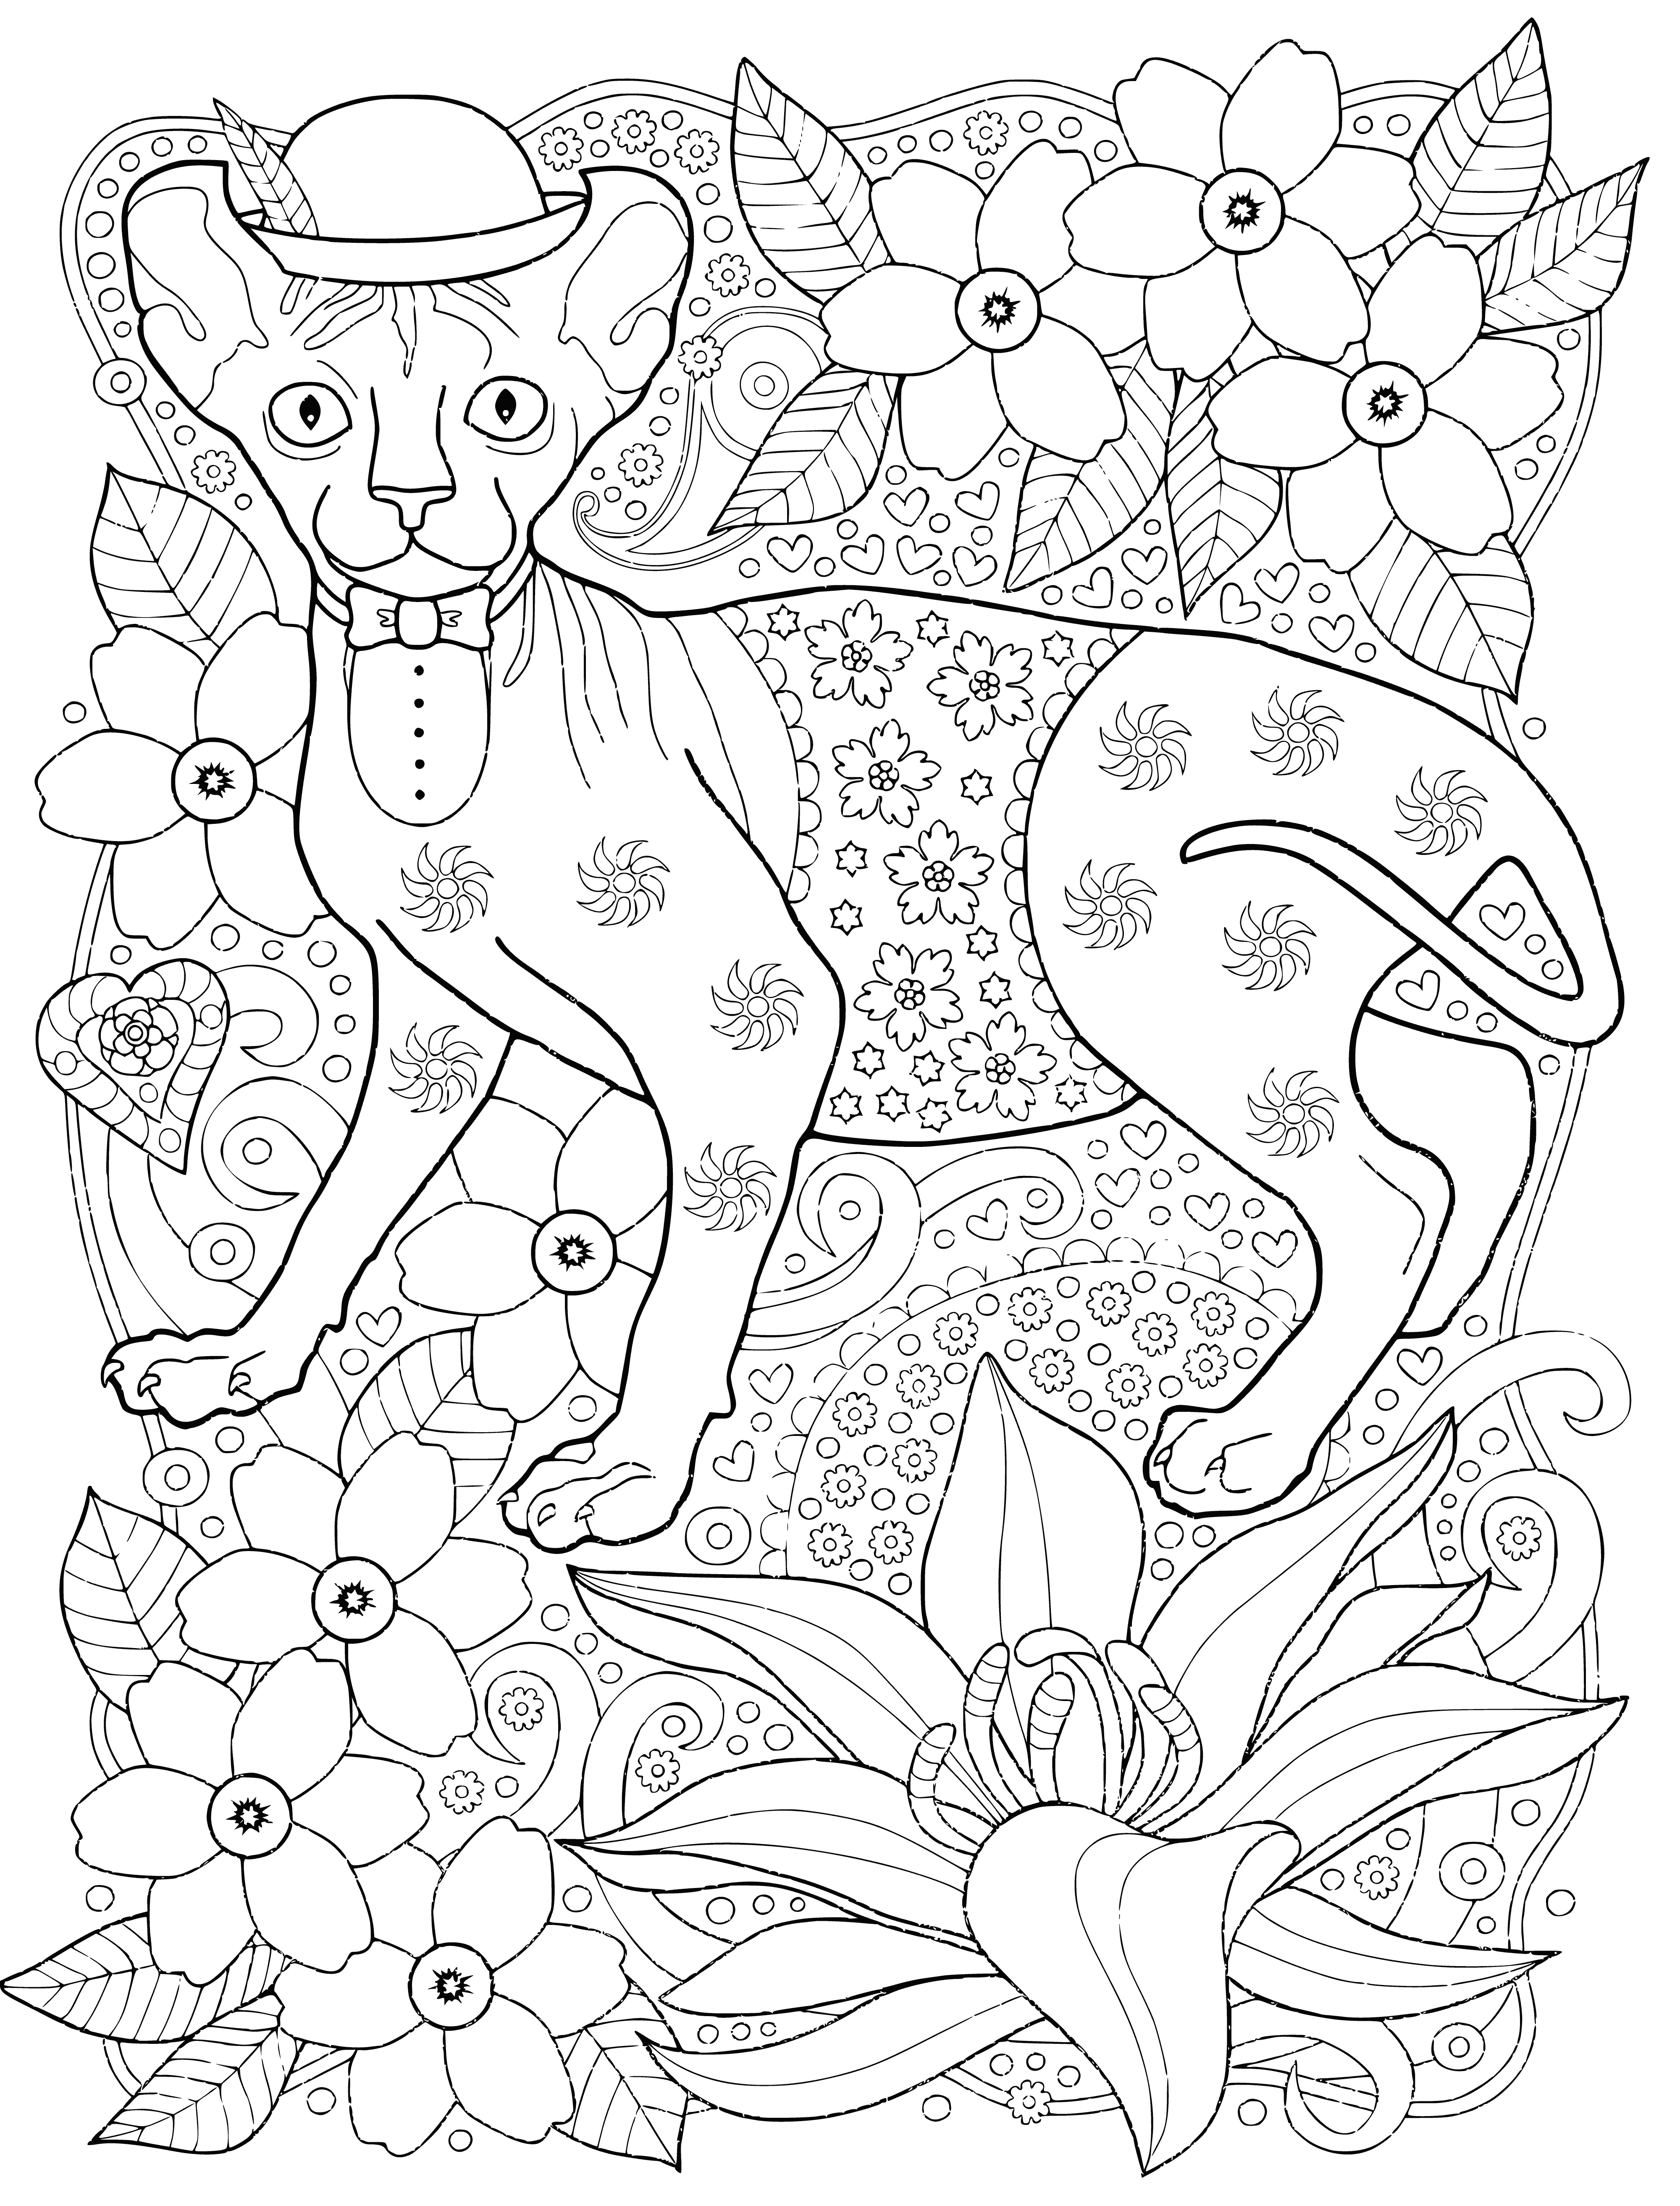 coloring page: A large Sphinx cat colors paged wearing a tall hat against a brown & green background. #cats